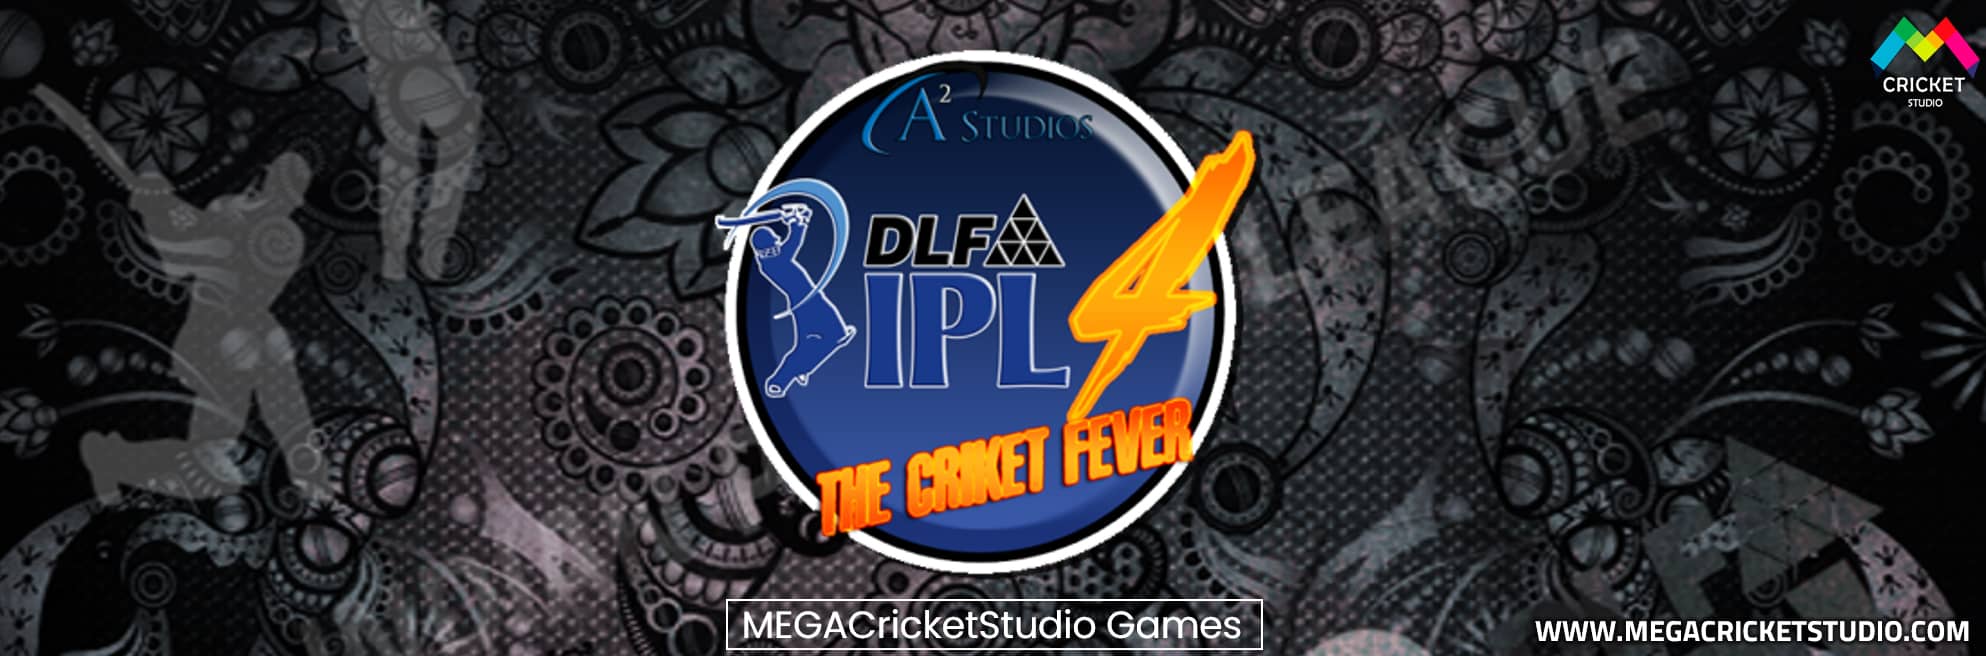 IPL 4 - THE CRICKET FEVER Patch for EA Cricket 07